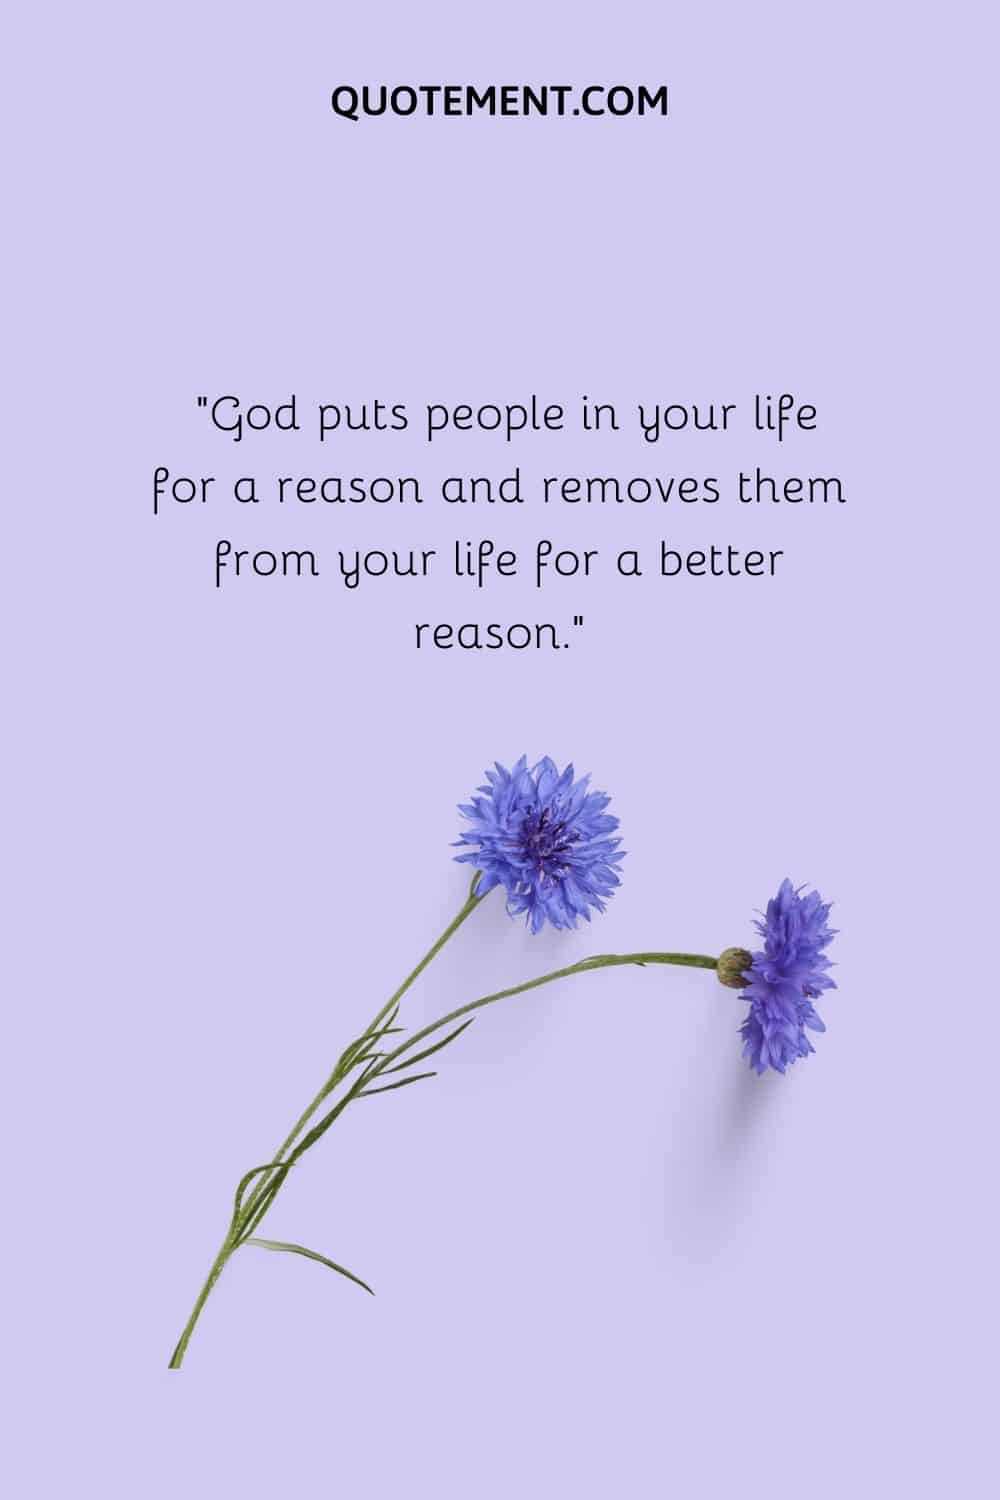 God puts people in your life for a reason and removes them from your life for a better reason